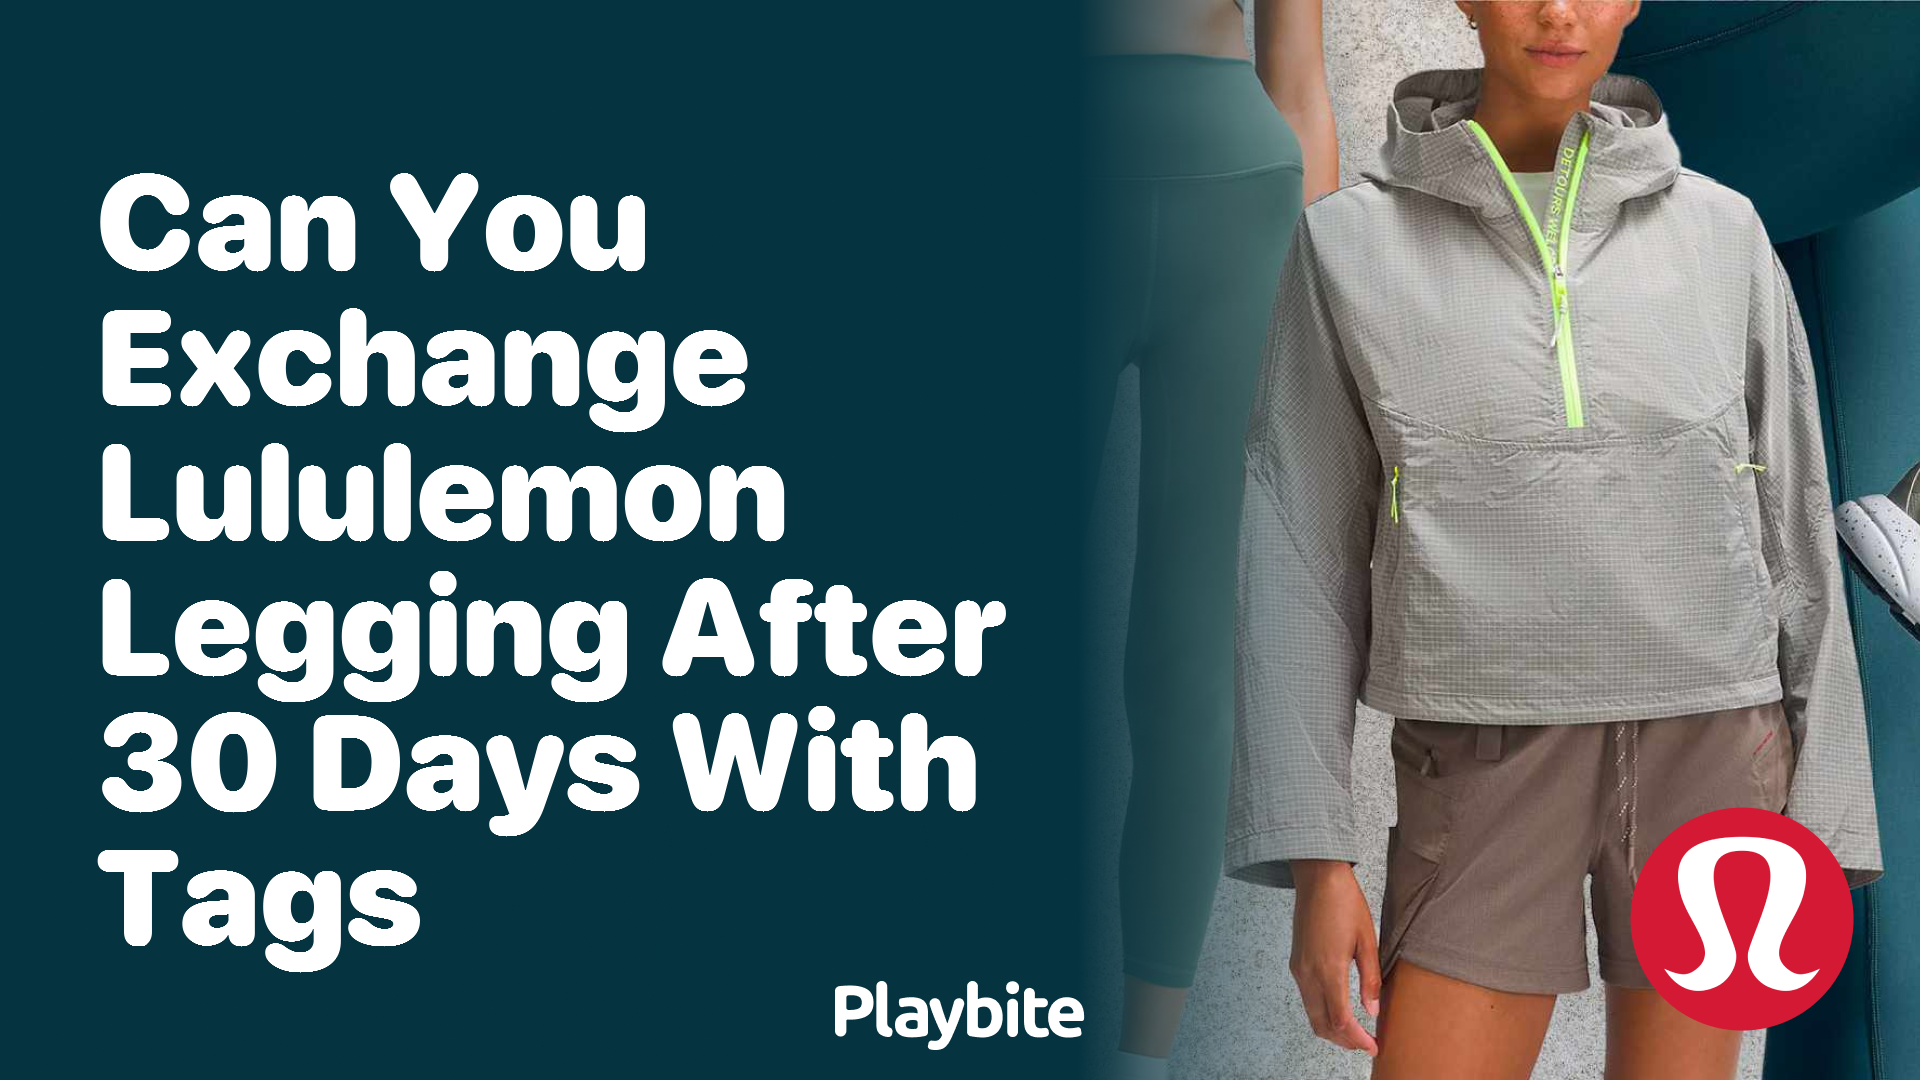 Can You Exchange Lululemon Leggings for a New Pair? - Playbite